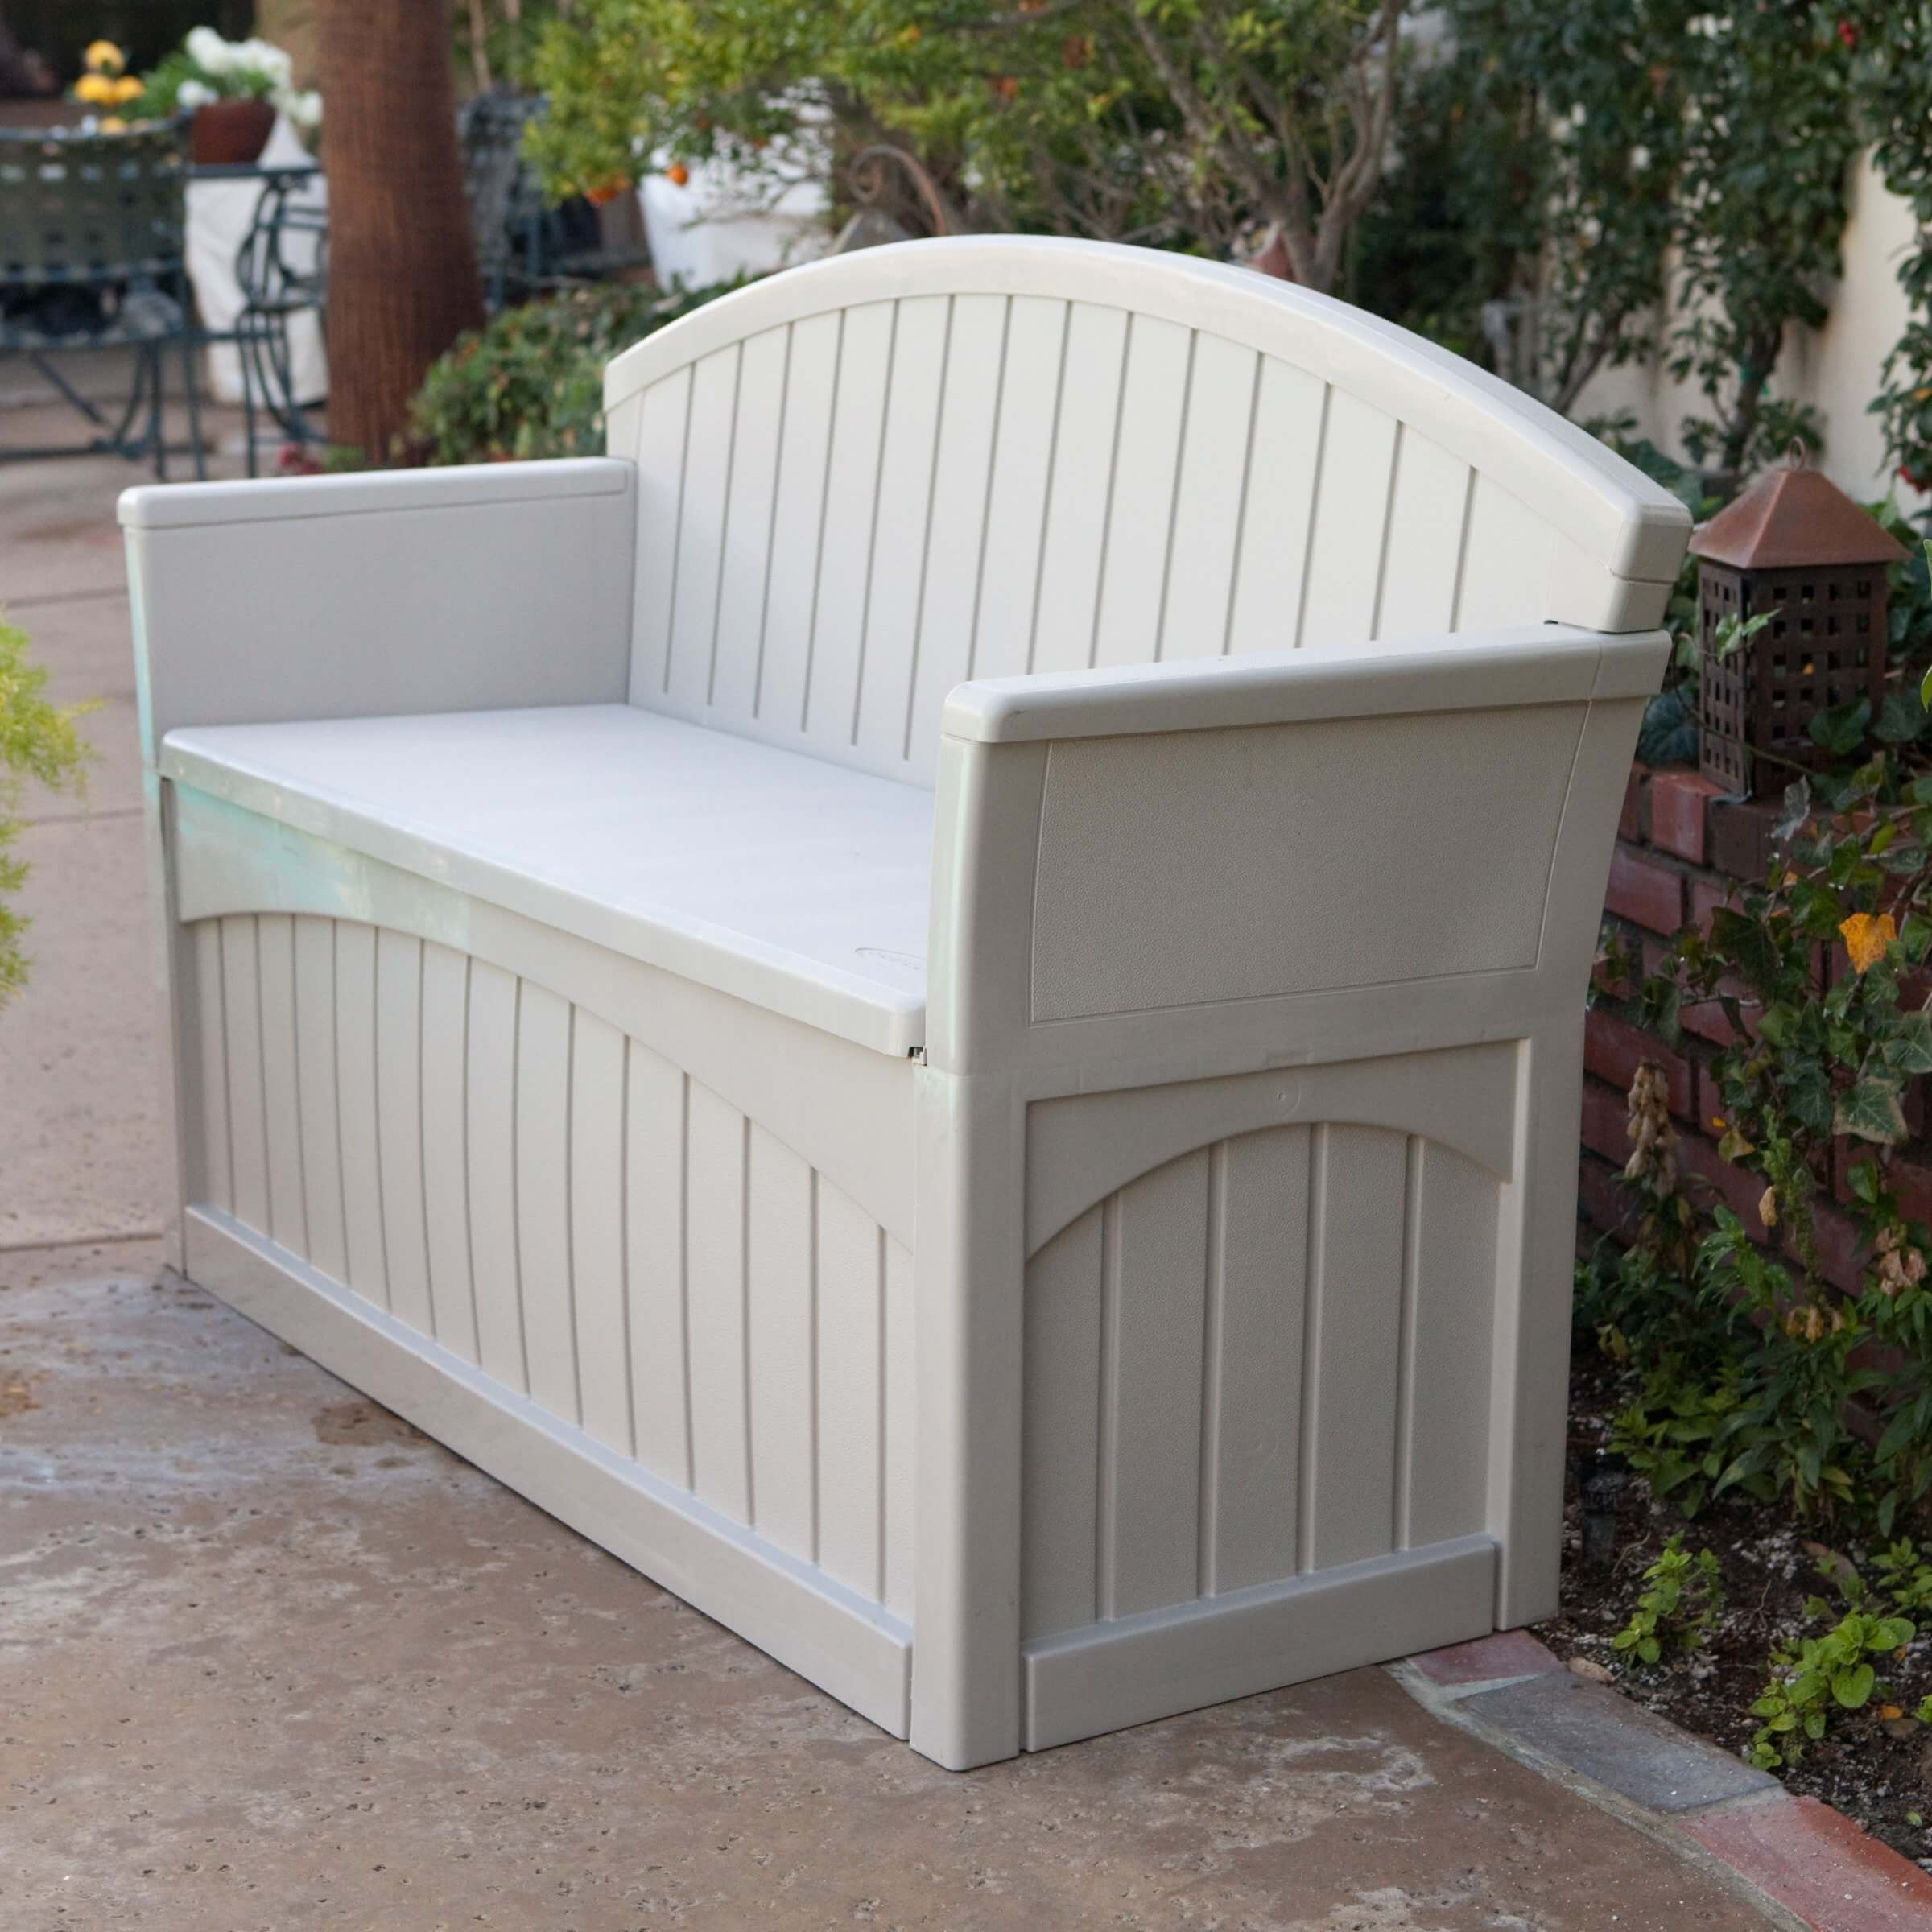 Outdoor Storage Bench With Cushion
 Top 10 Types of Outdoor Deck Storage Boxes